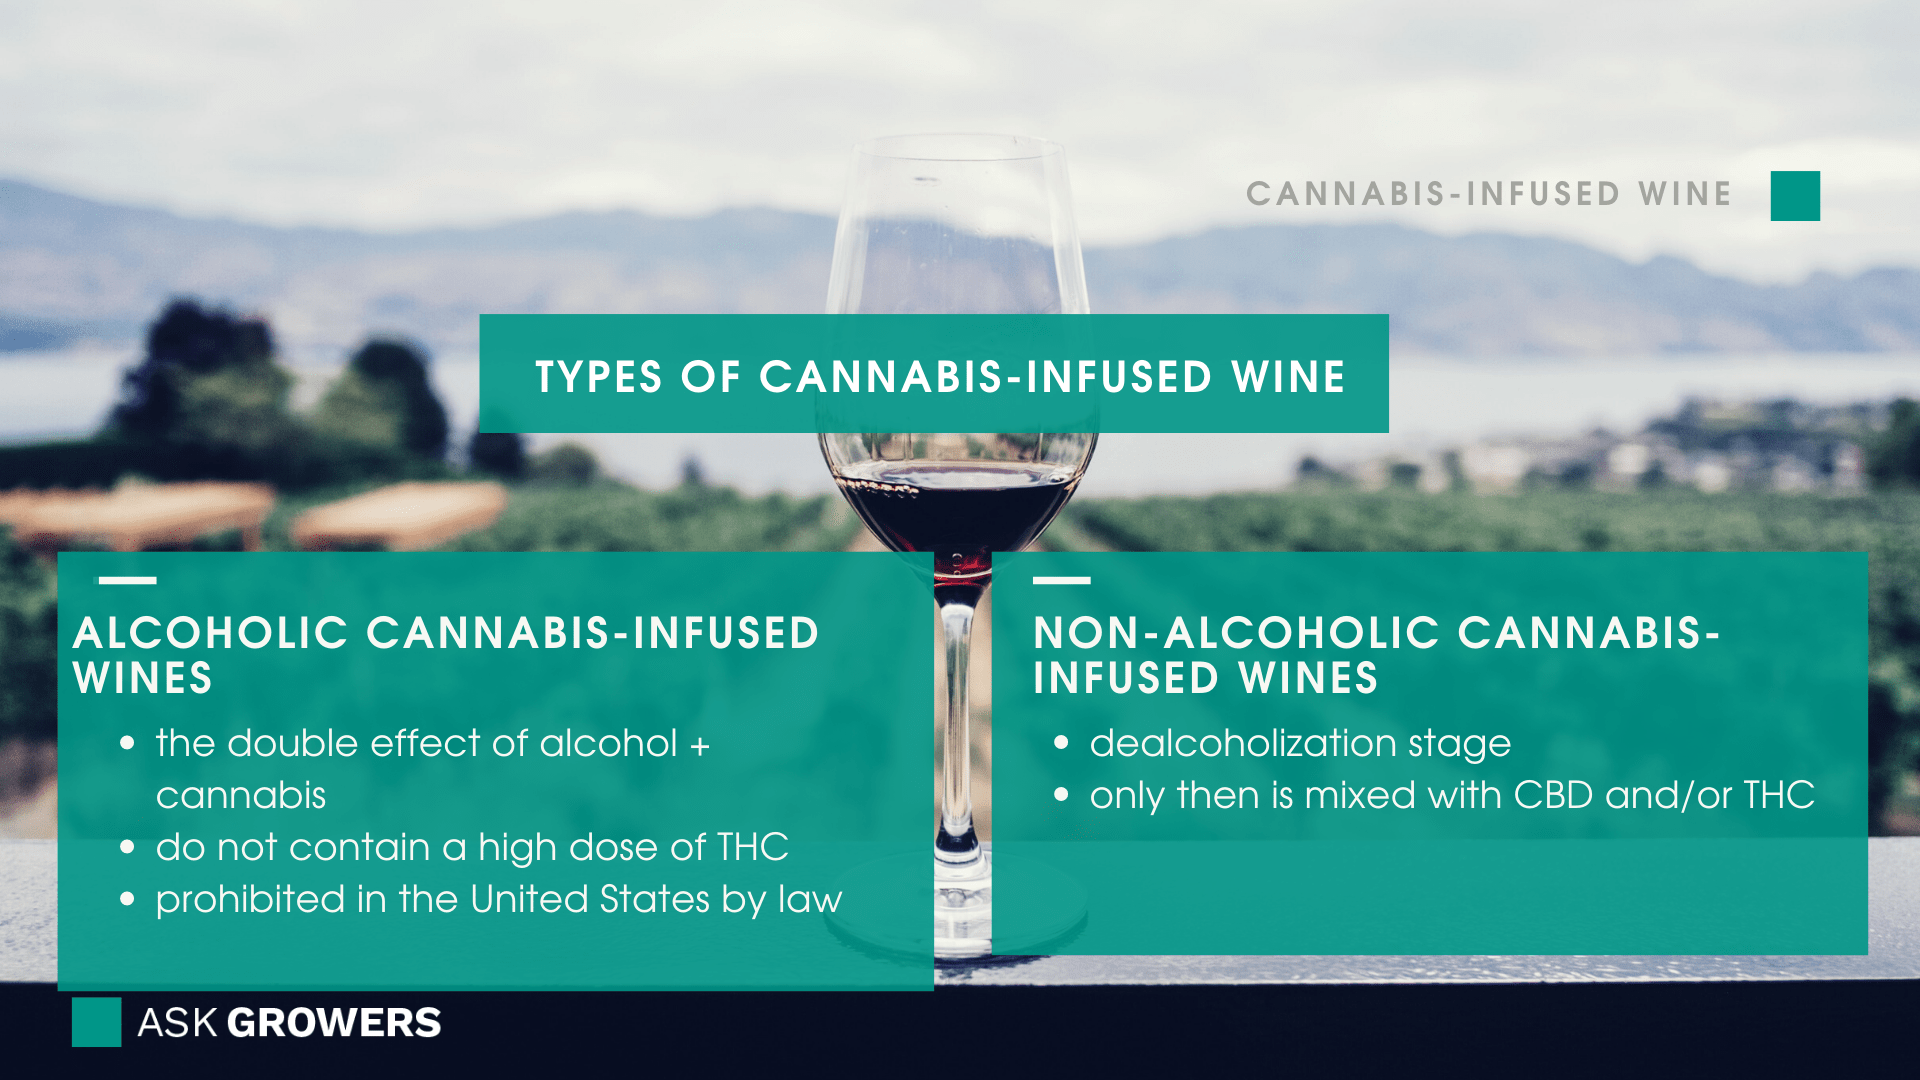 cannabis-infused wine AskGrowers